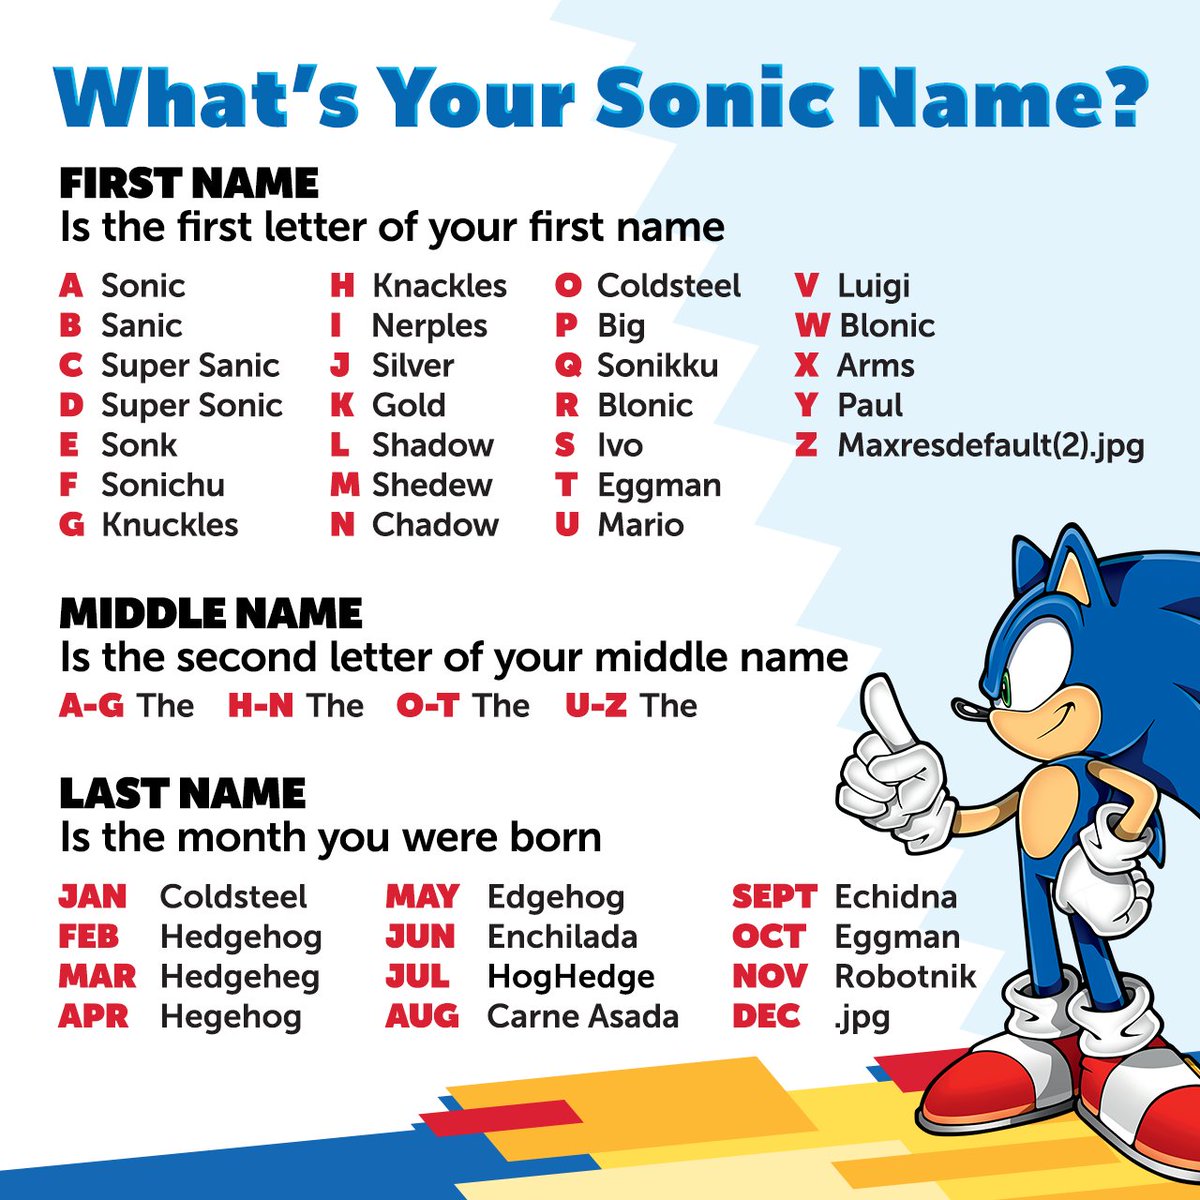 Sonic The Hedgehog Alone On A Friday Then Be Rad And Tell Us Your Sonic Name